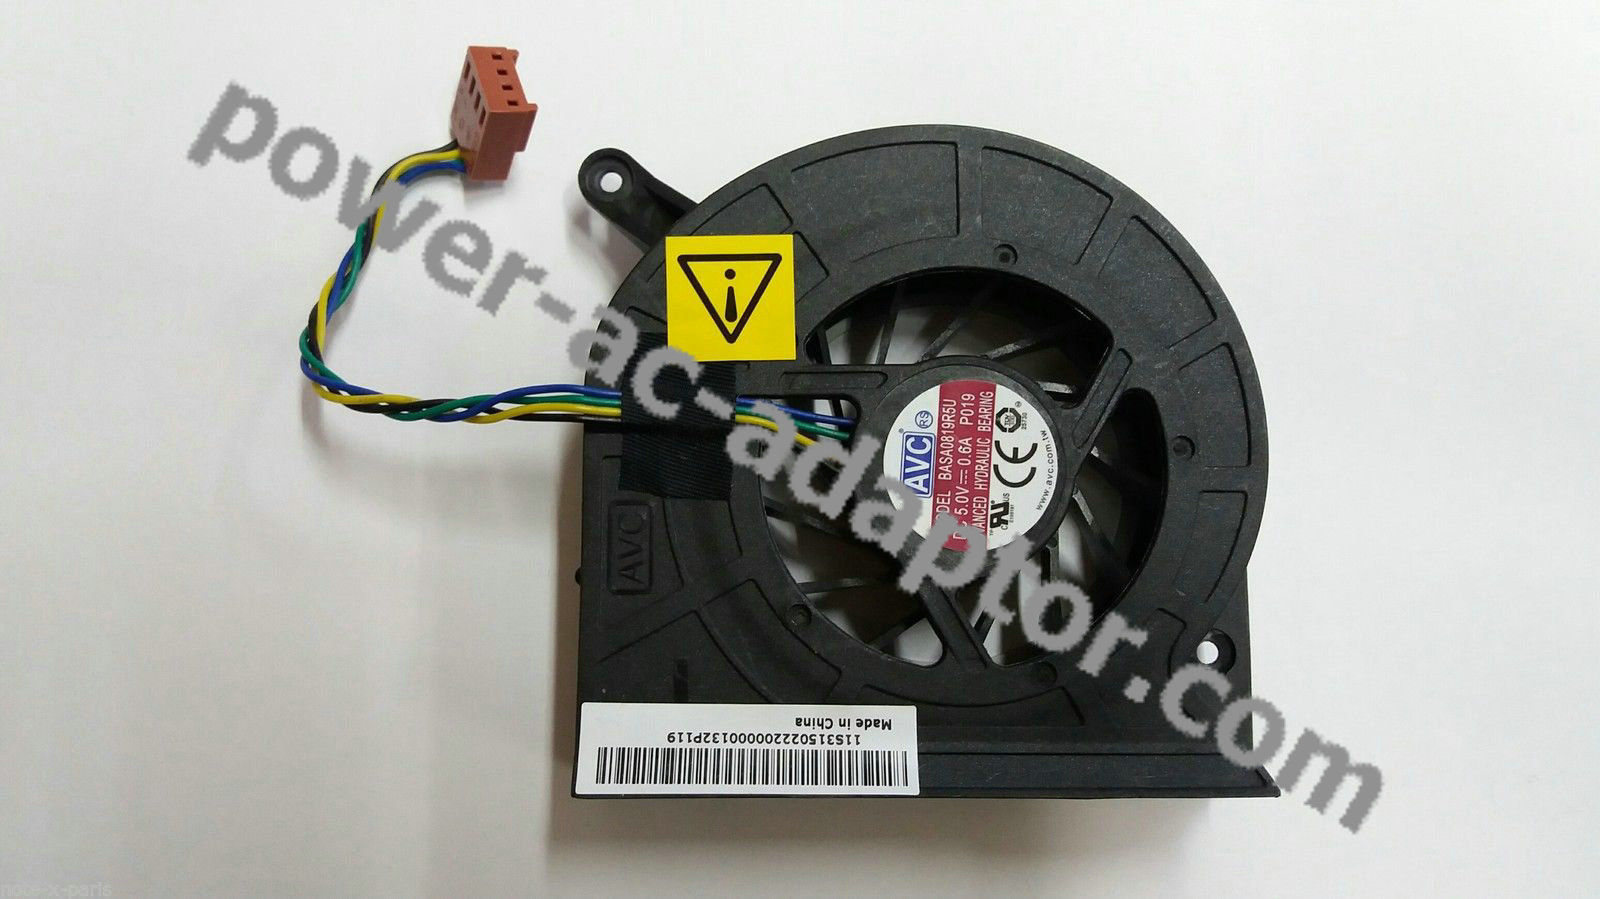 NEW Dell Inspiron One 2305 2310 2205 All-in-One Cpu Cooling Fan